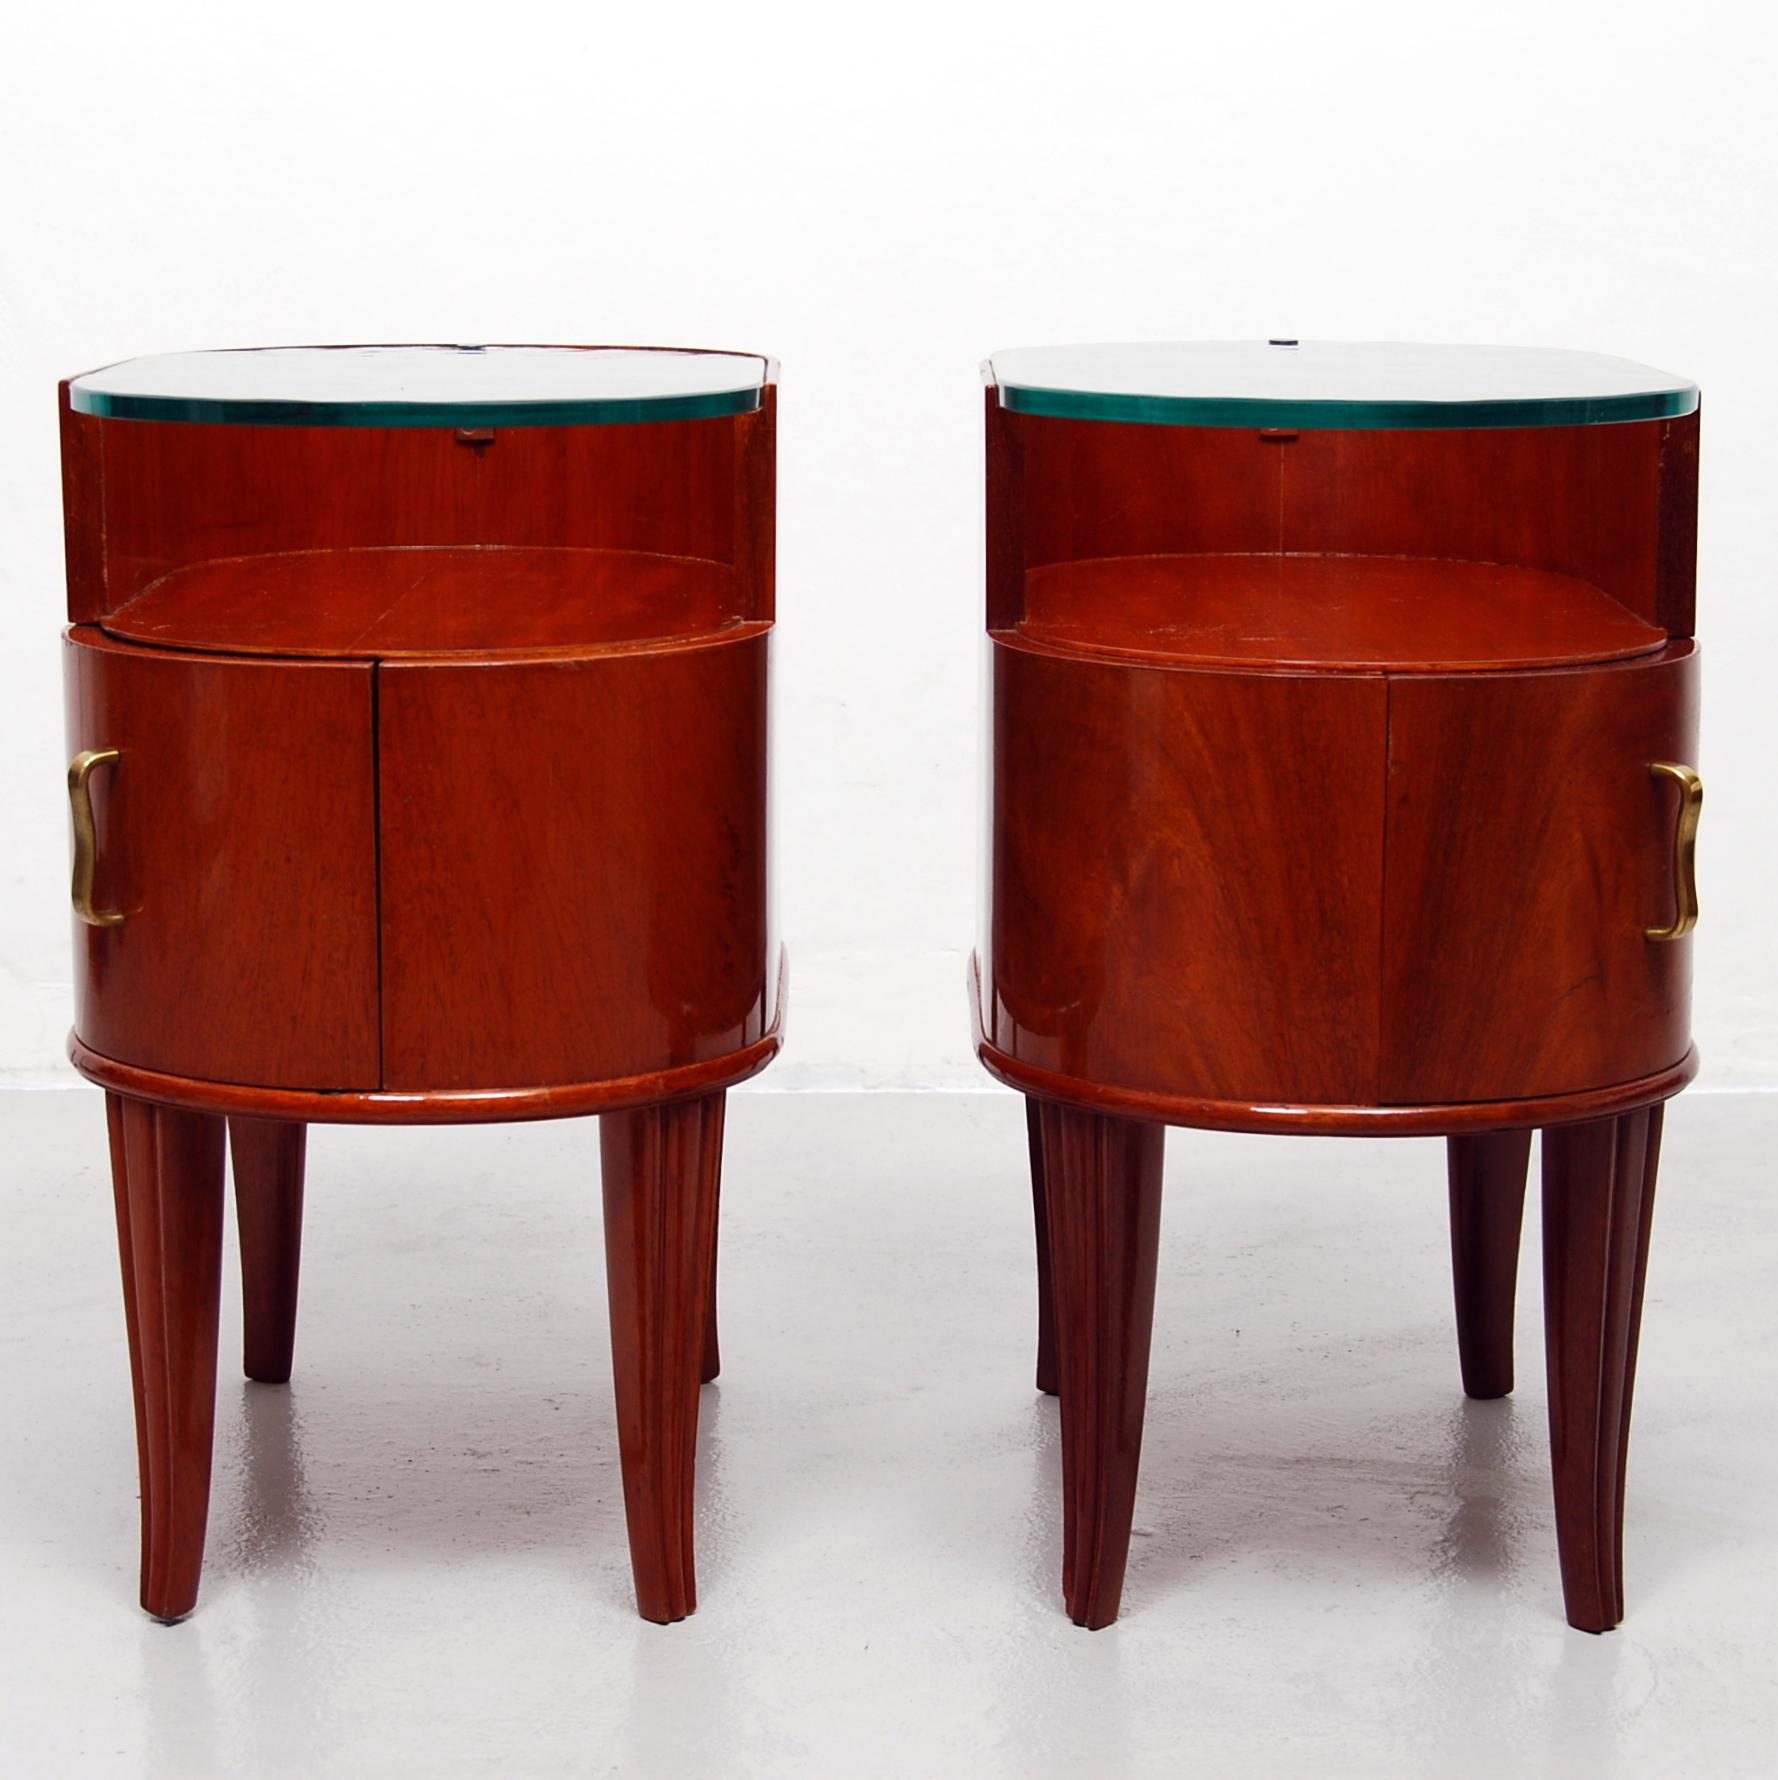 Mid-20th Century Rare Pair of Bedside Tables or Nightstands by Axel Larsson Produced by SMF